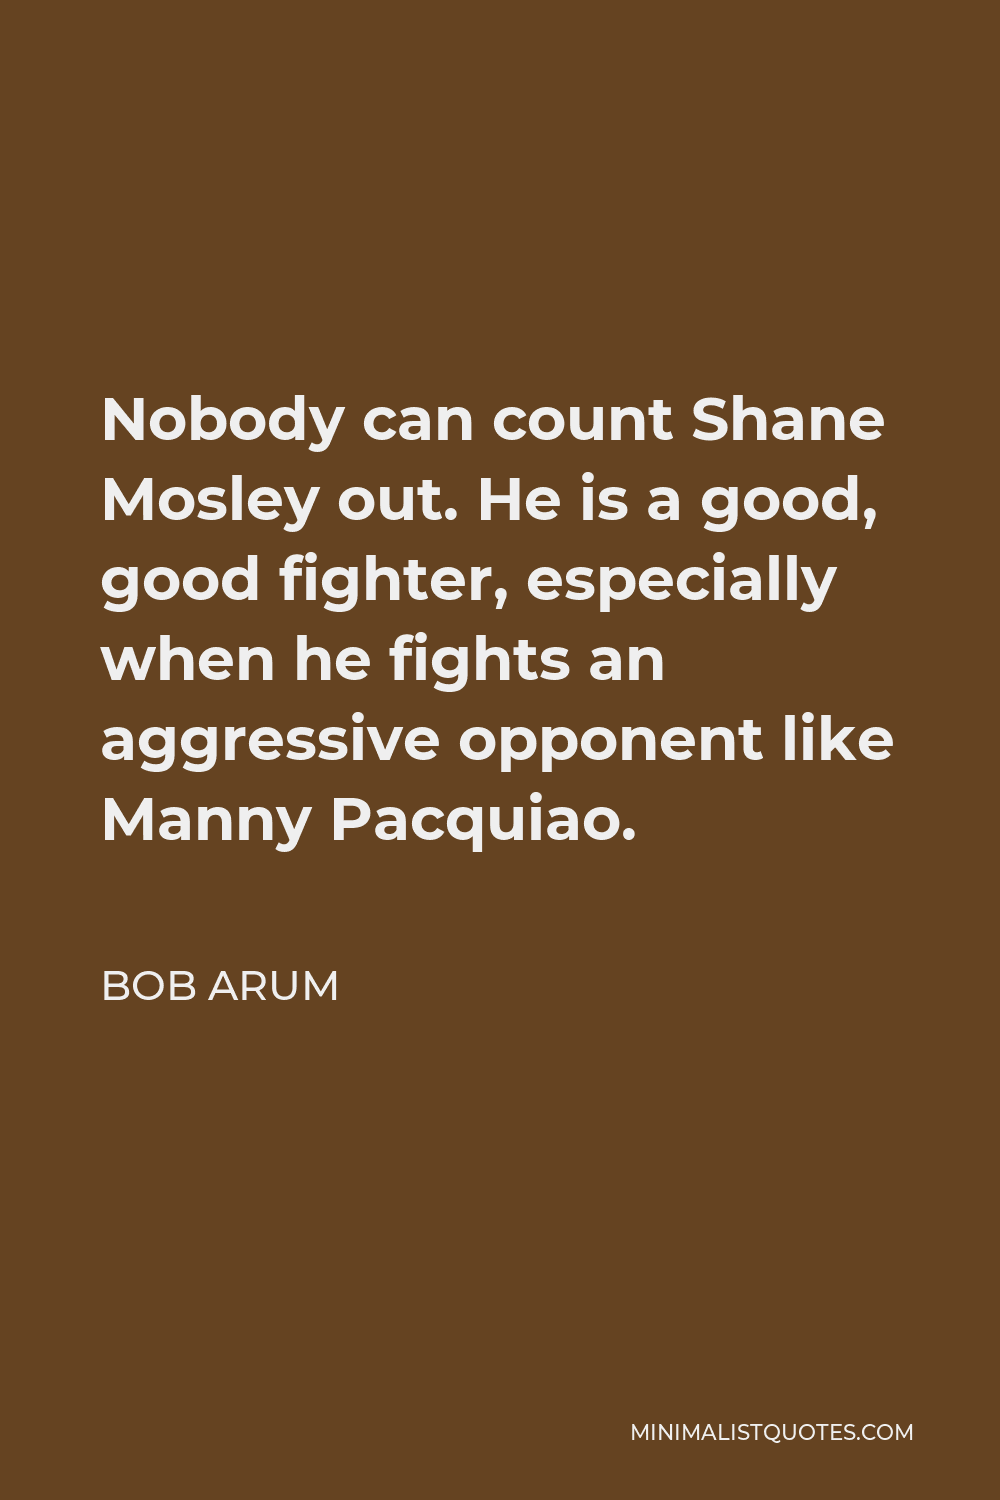 Bob Arum Quote - Nobody can count Shane Mosley out. He is a good, good fighter, especially when he fights an aggressive opponent like Manny Pacquiao.